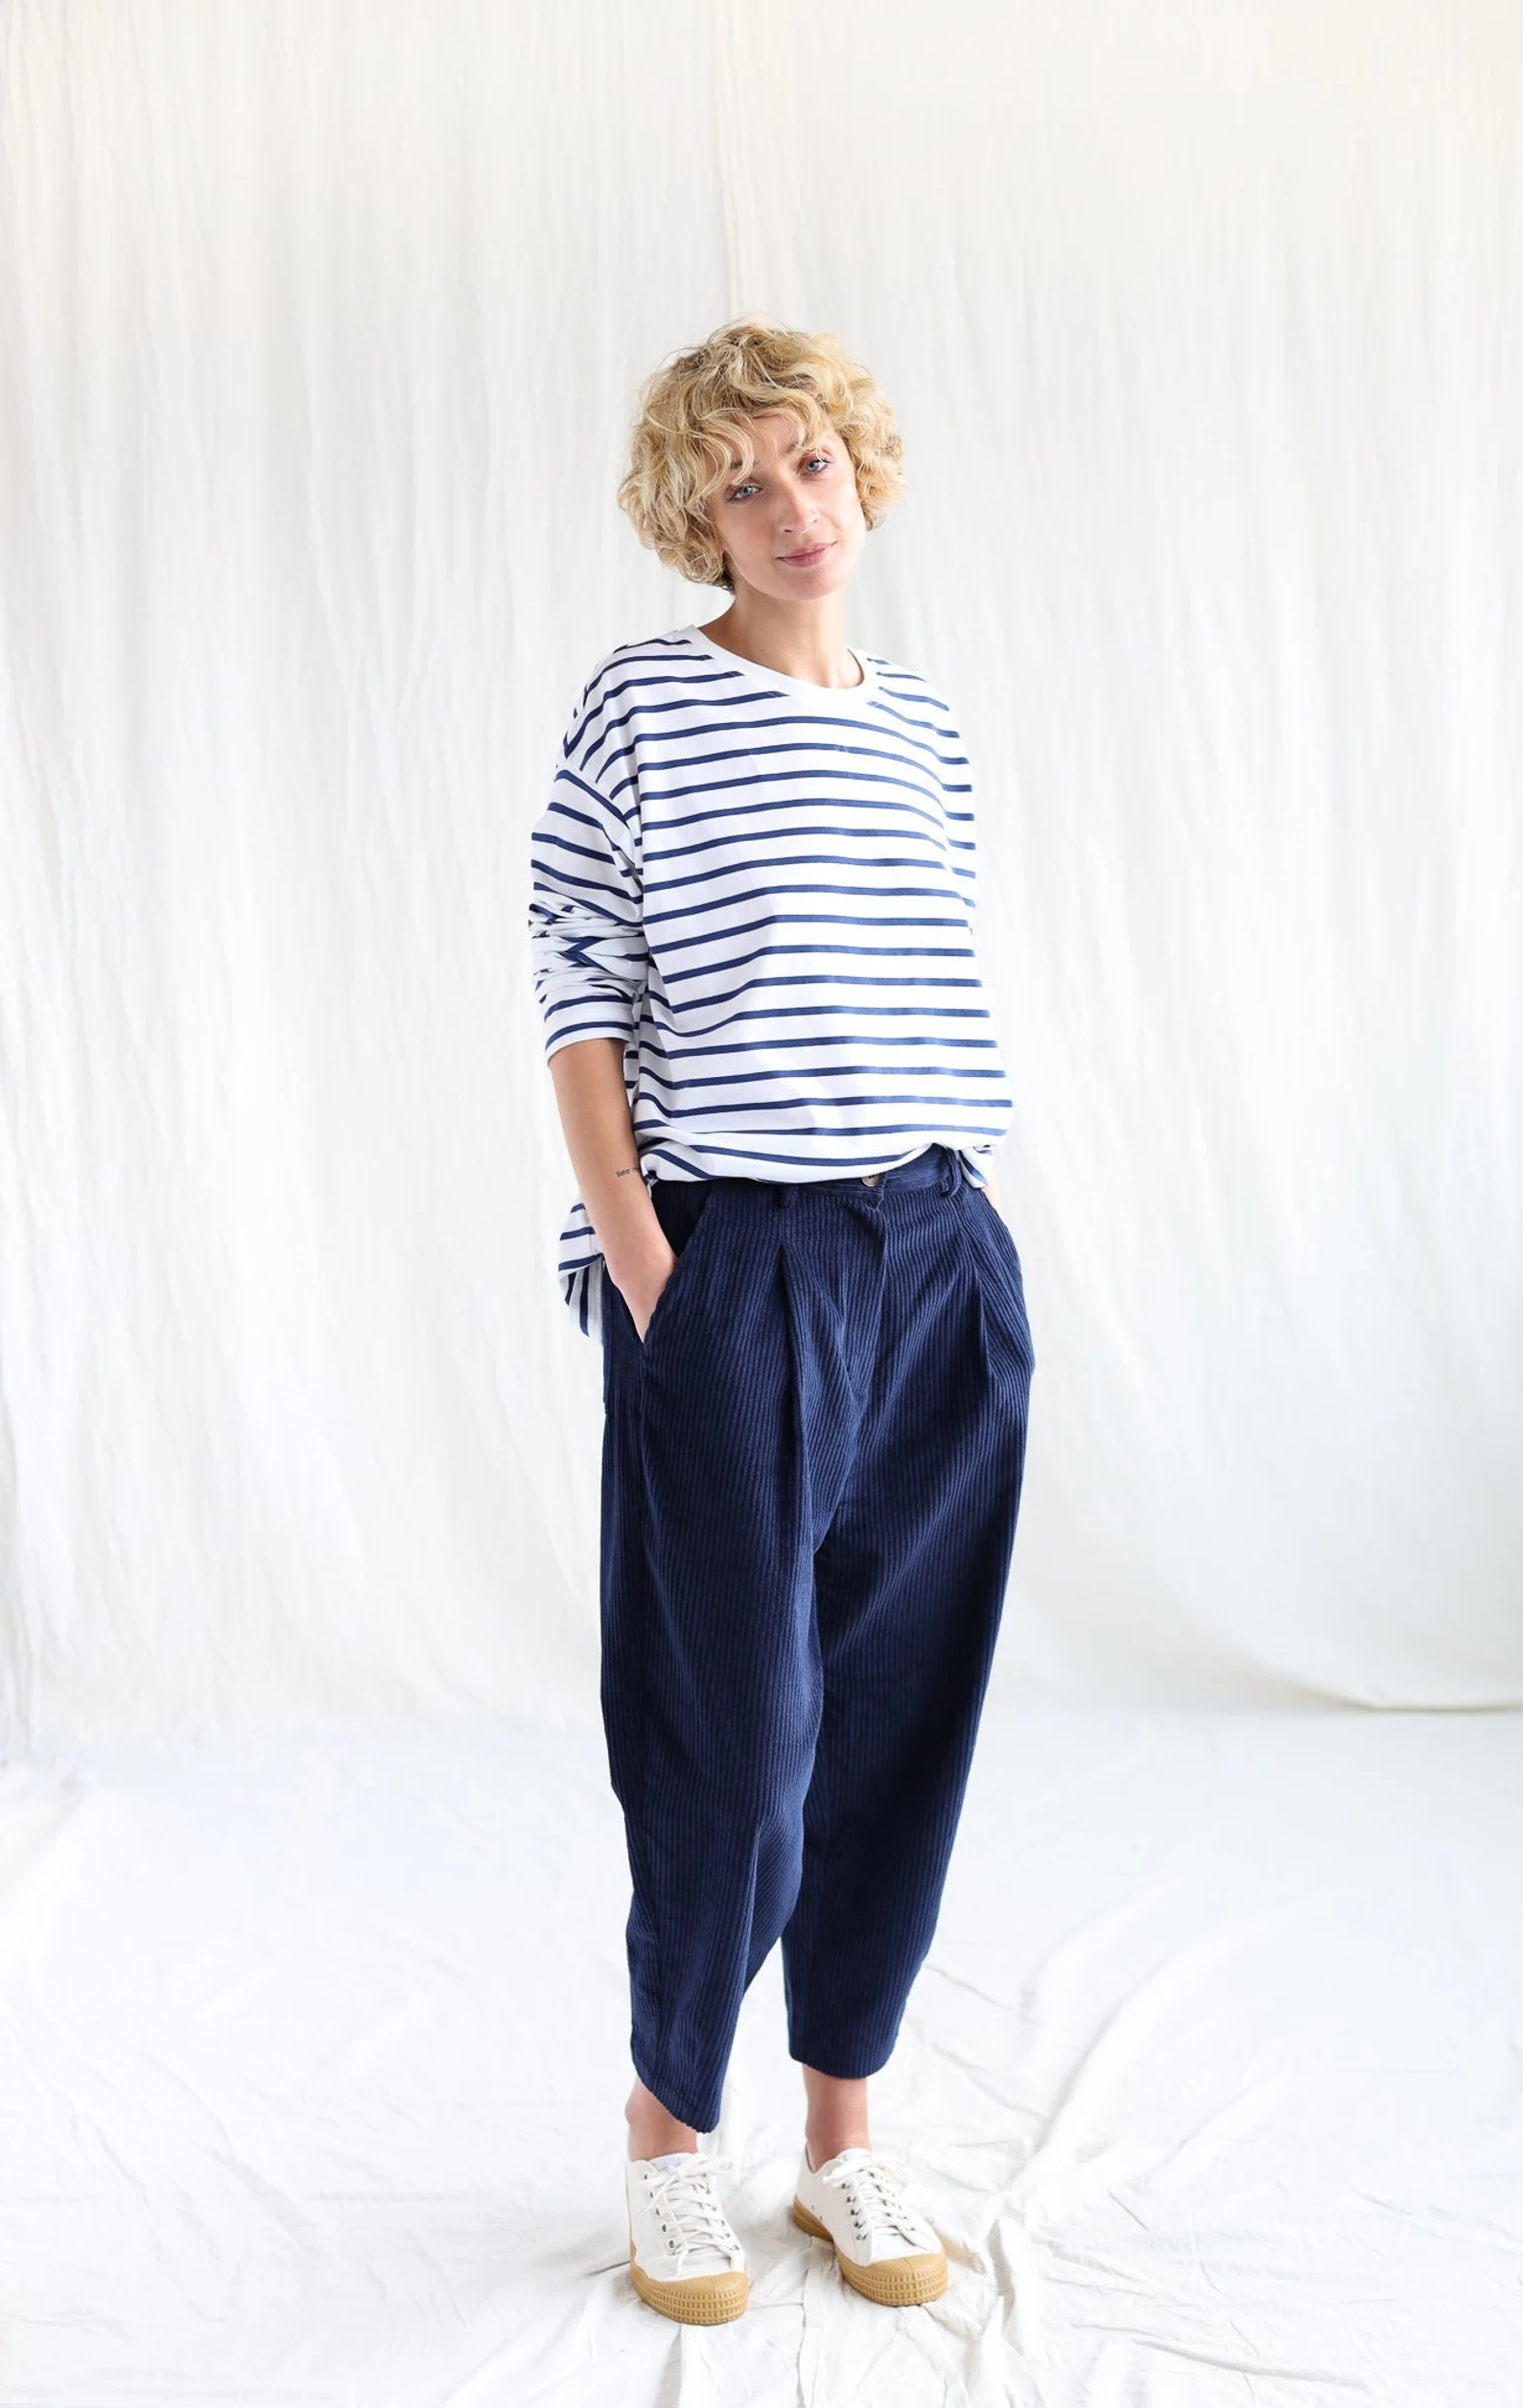 Nautical Chic: Stylish Blue Trousers for Every Look